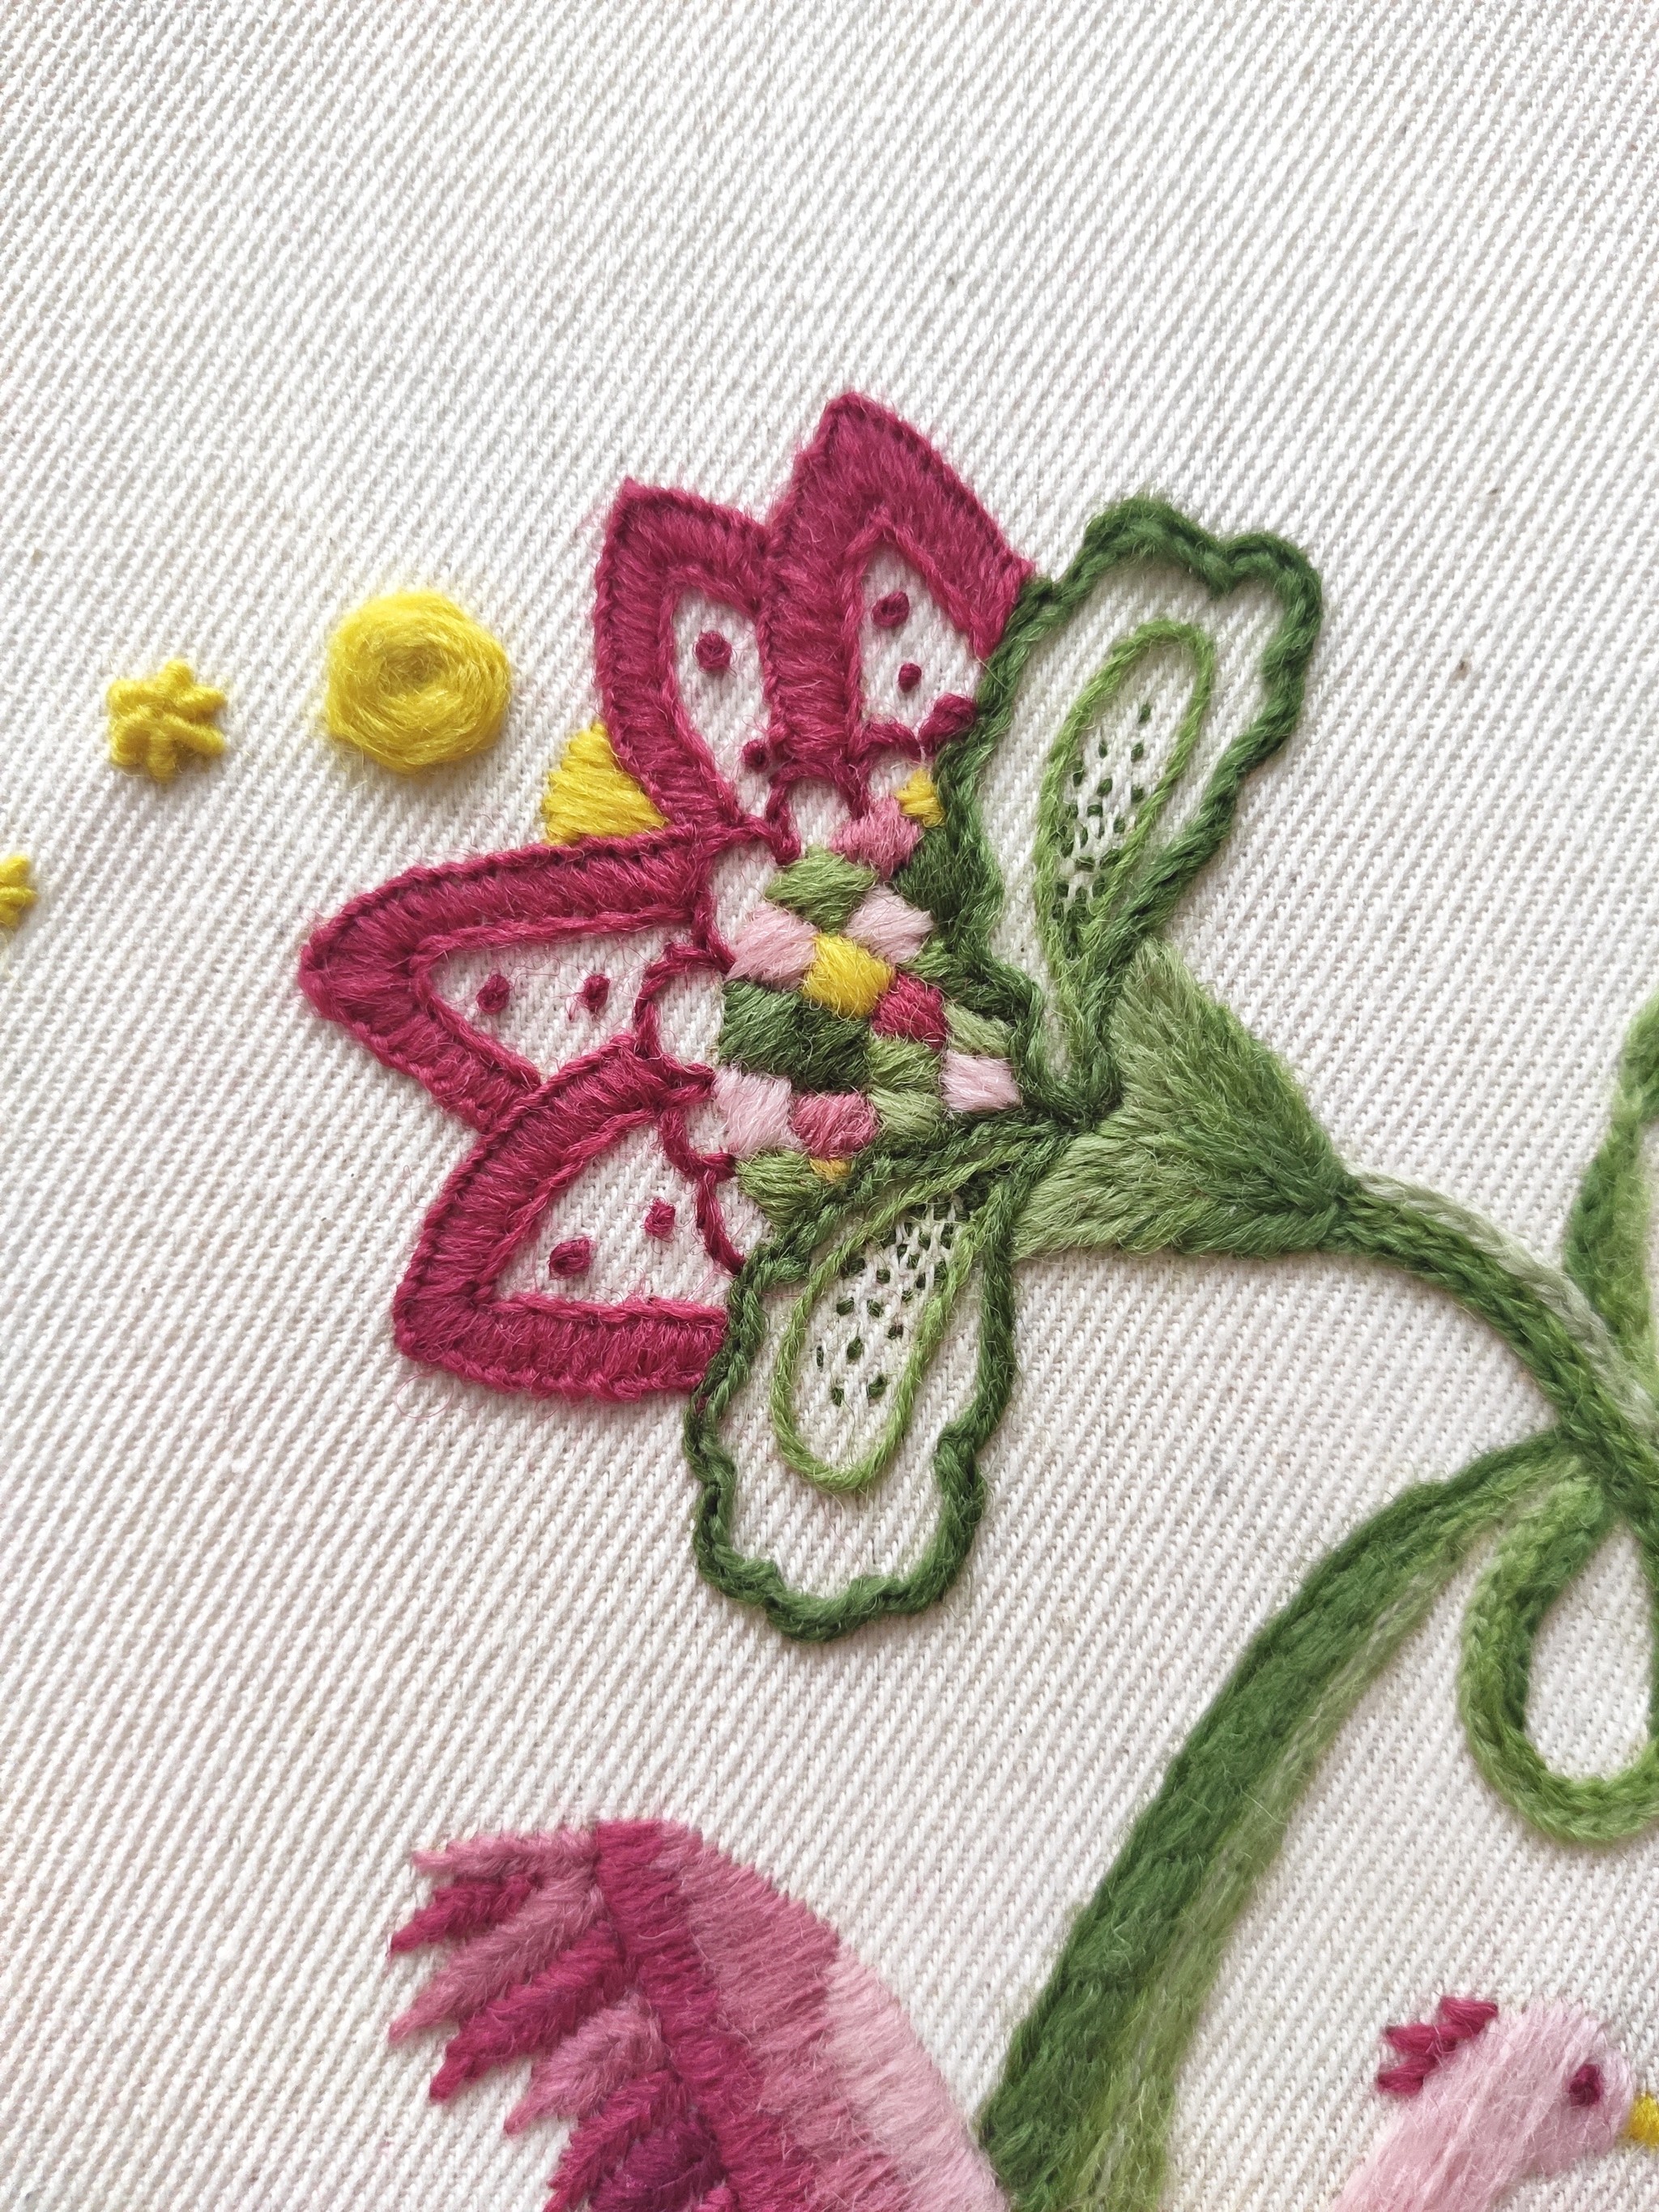 Jacobean embroidery - My, Handmade, Embroidery, Minsk, Longpost, Needlework without process